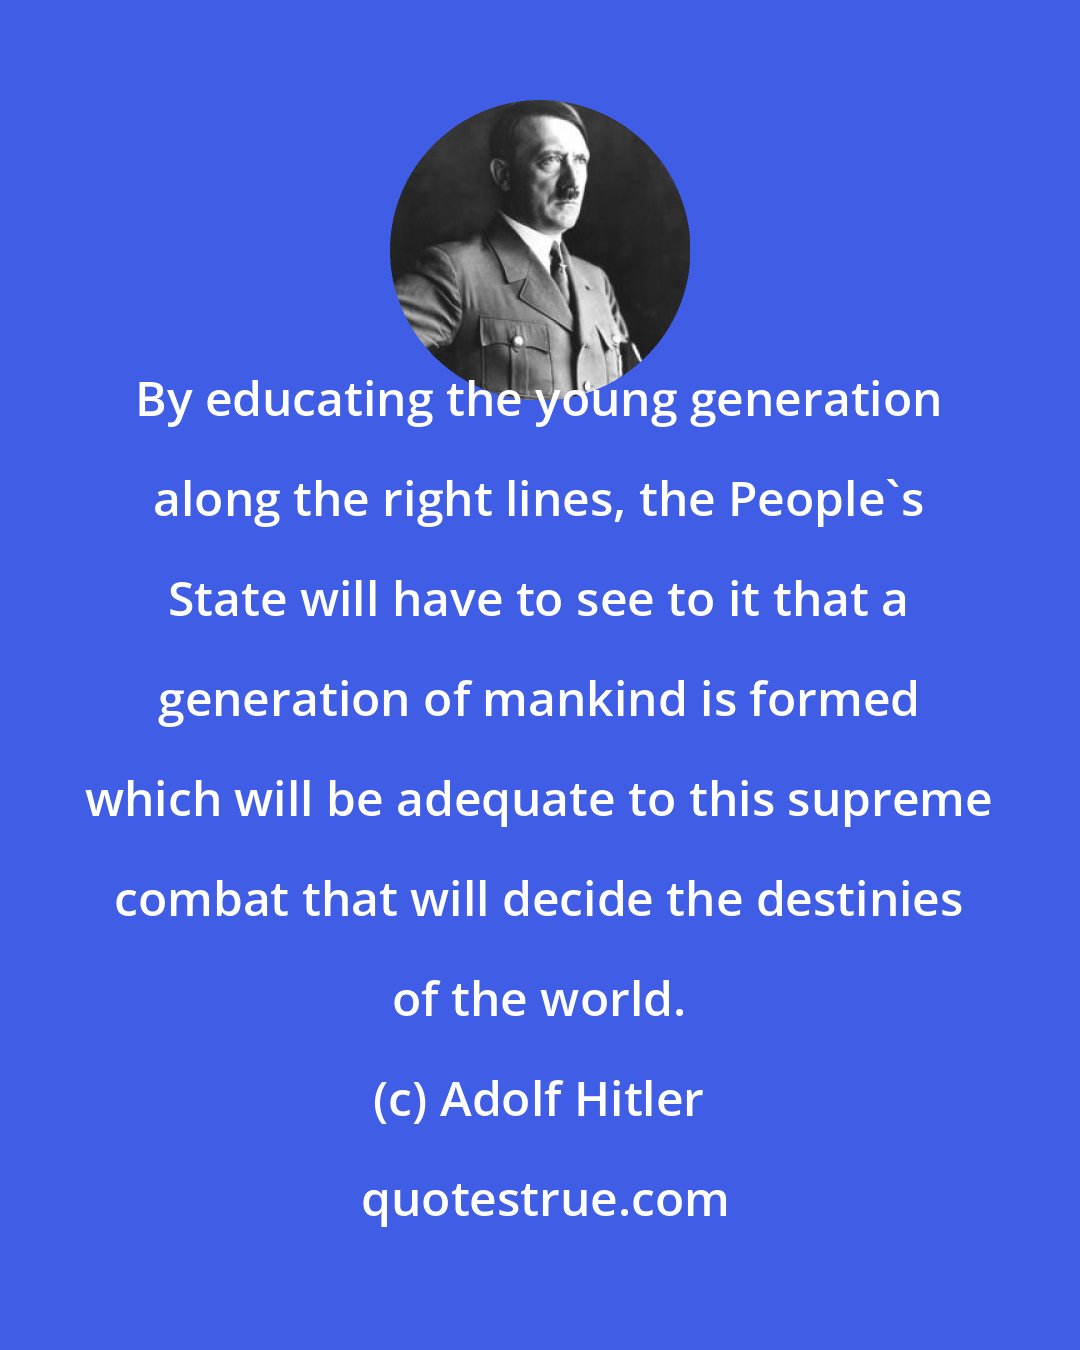 Adolf Hitler: By educating the young generation along the right lines, the People's State will have to see to it that a generation of mankind is formed which will be adequate to this supreme combat that will decide the destinies of the world.